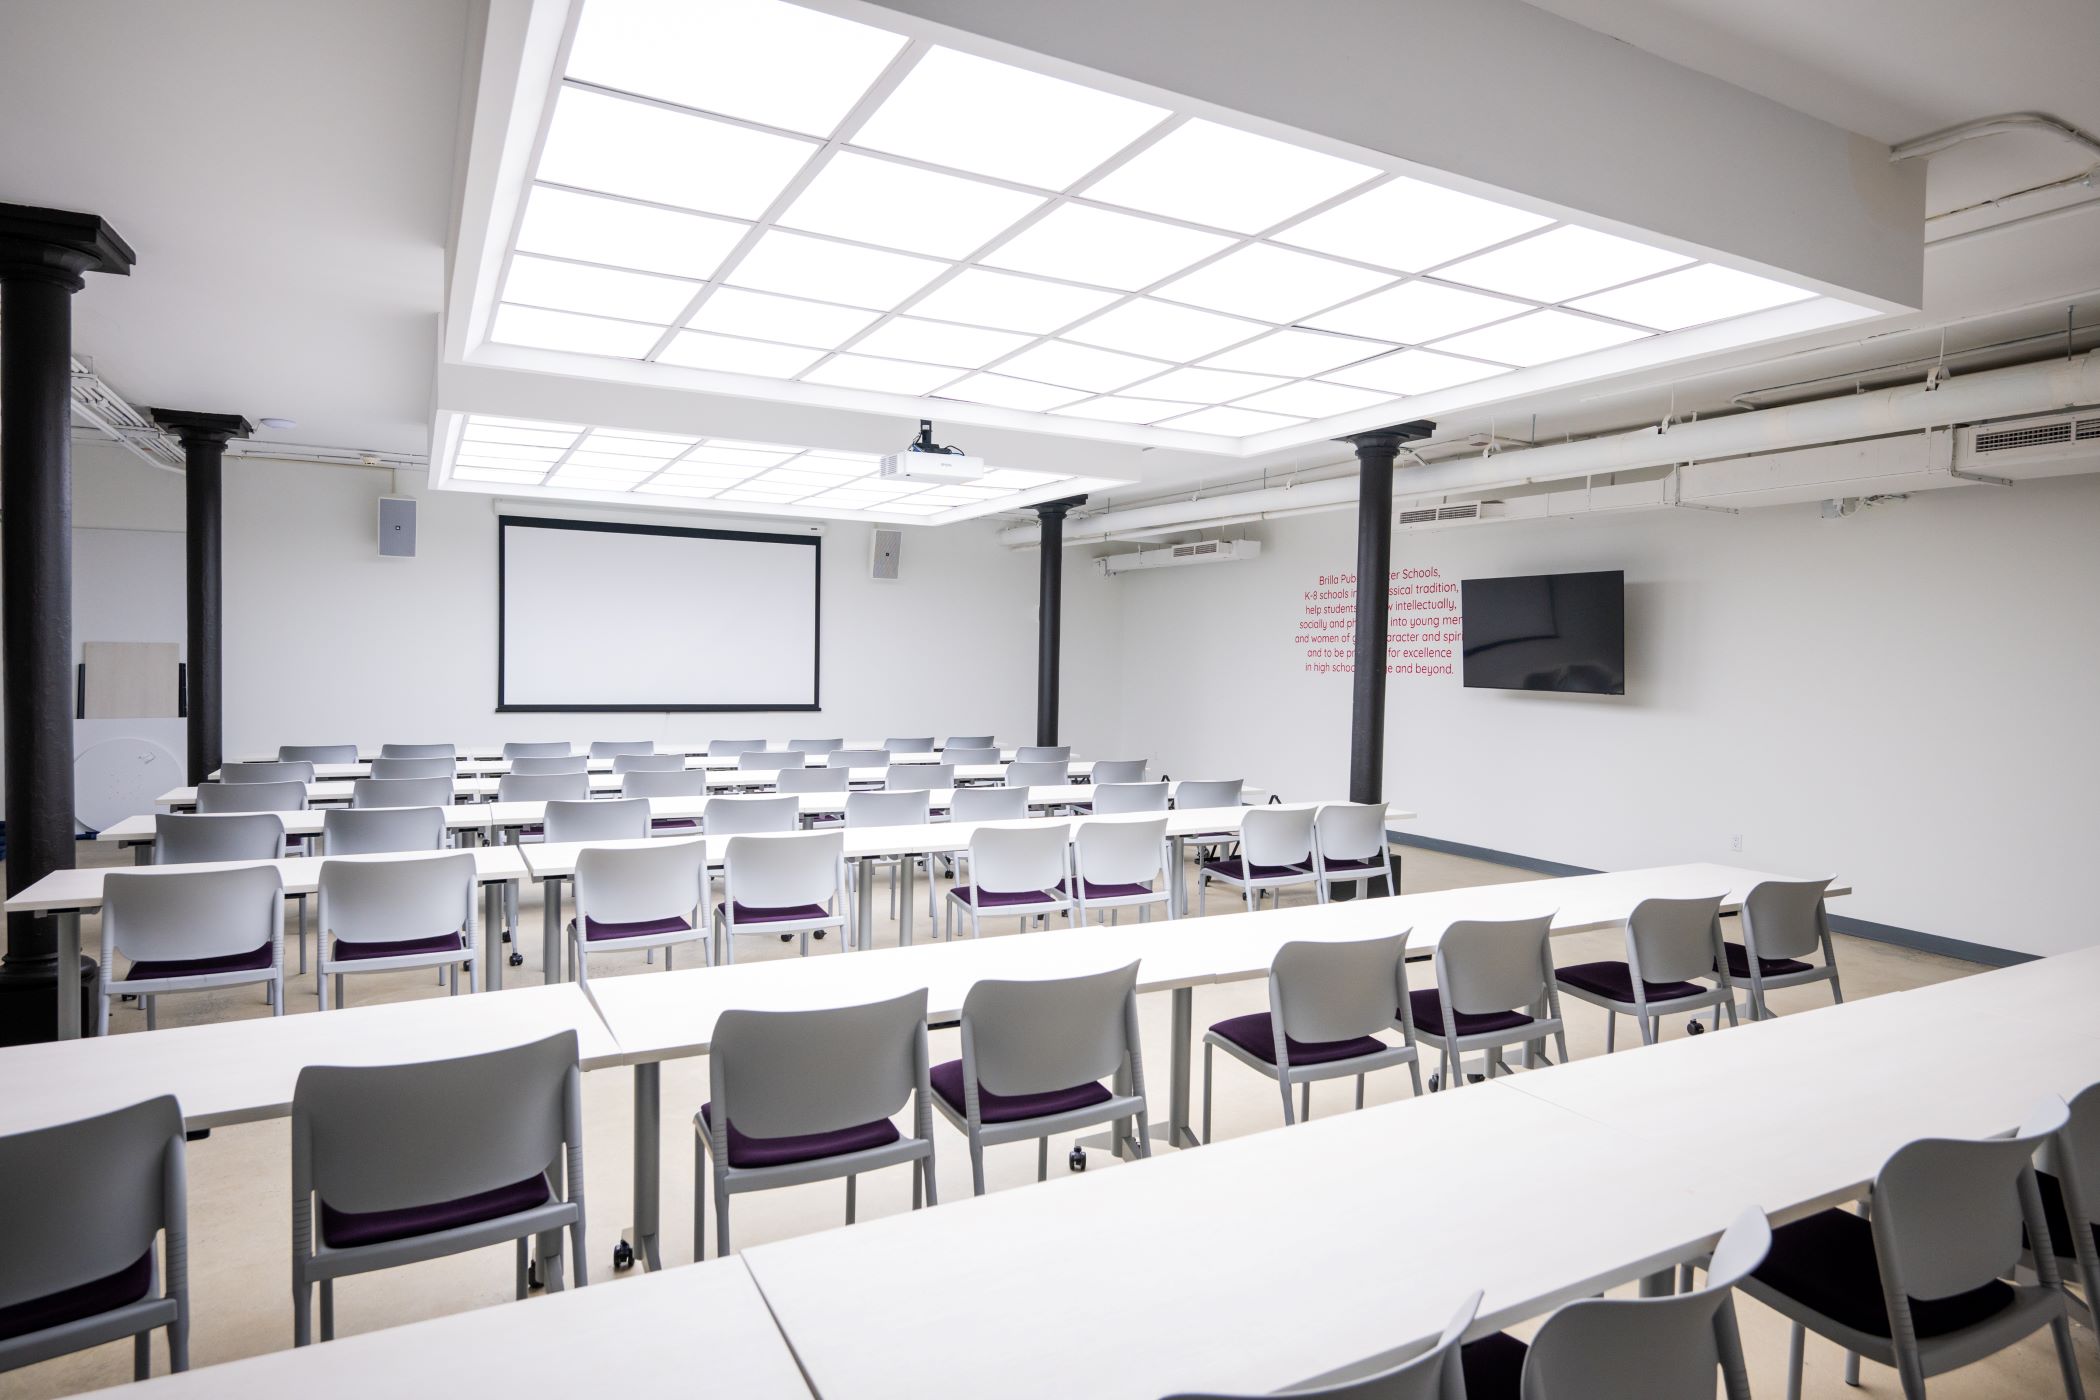 artificially lit white room with rows of tables and chairs facing a projector screen